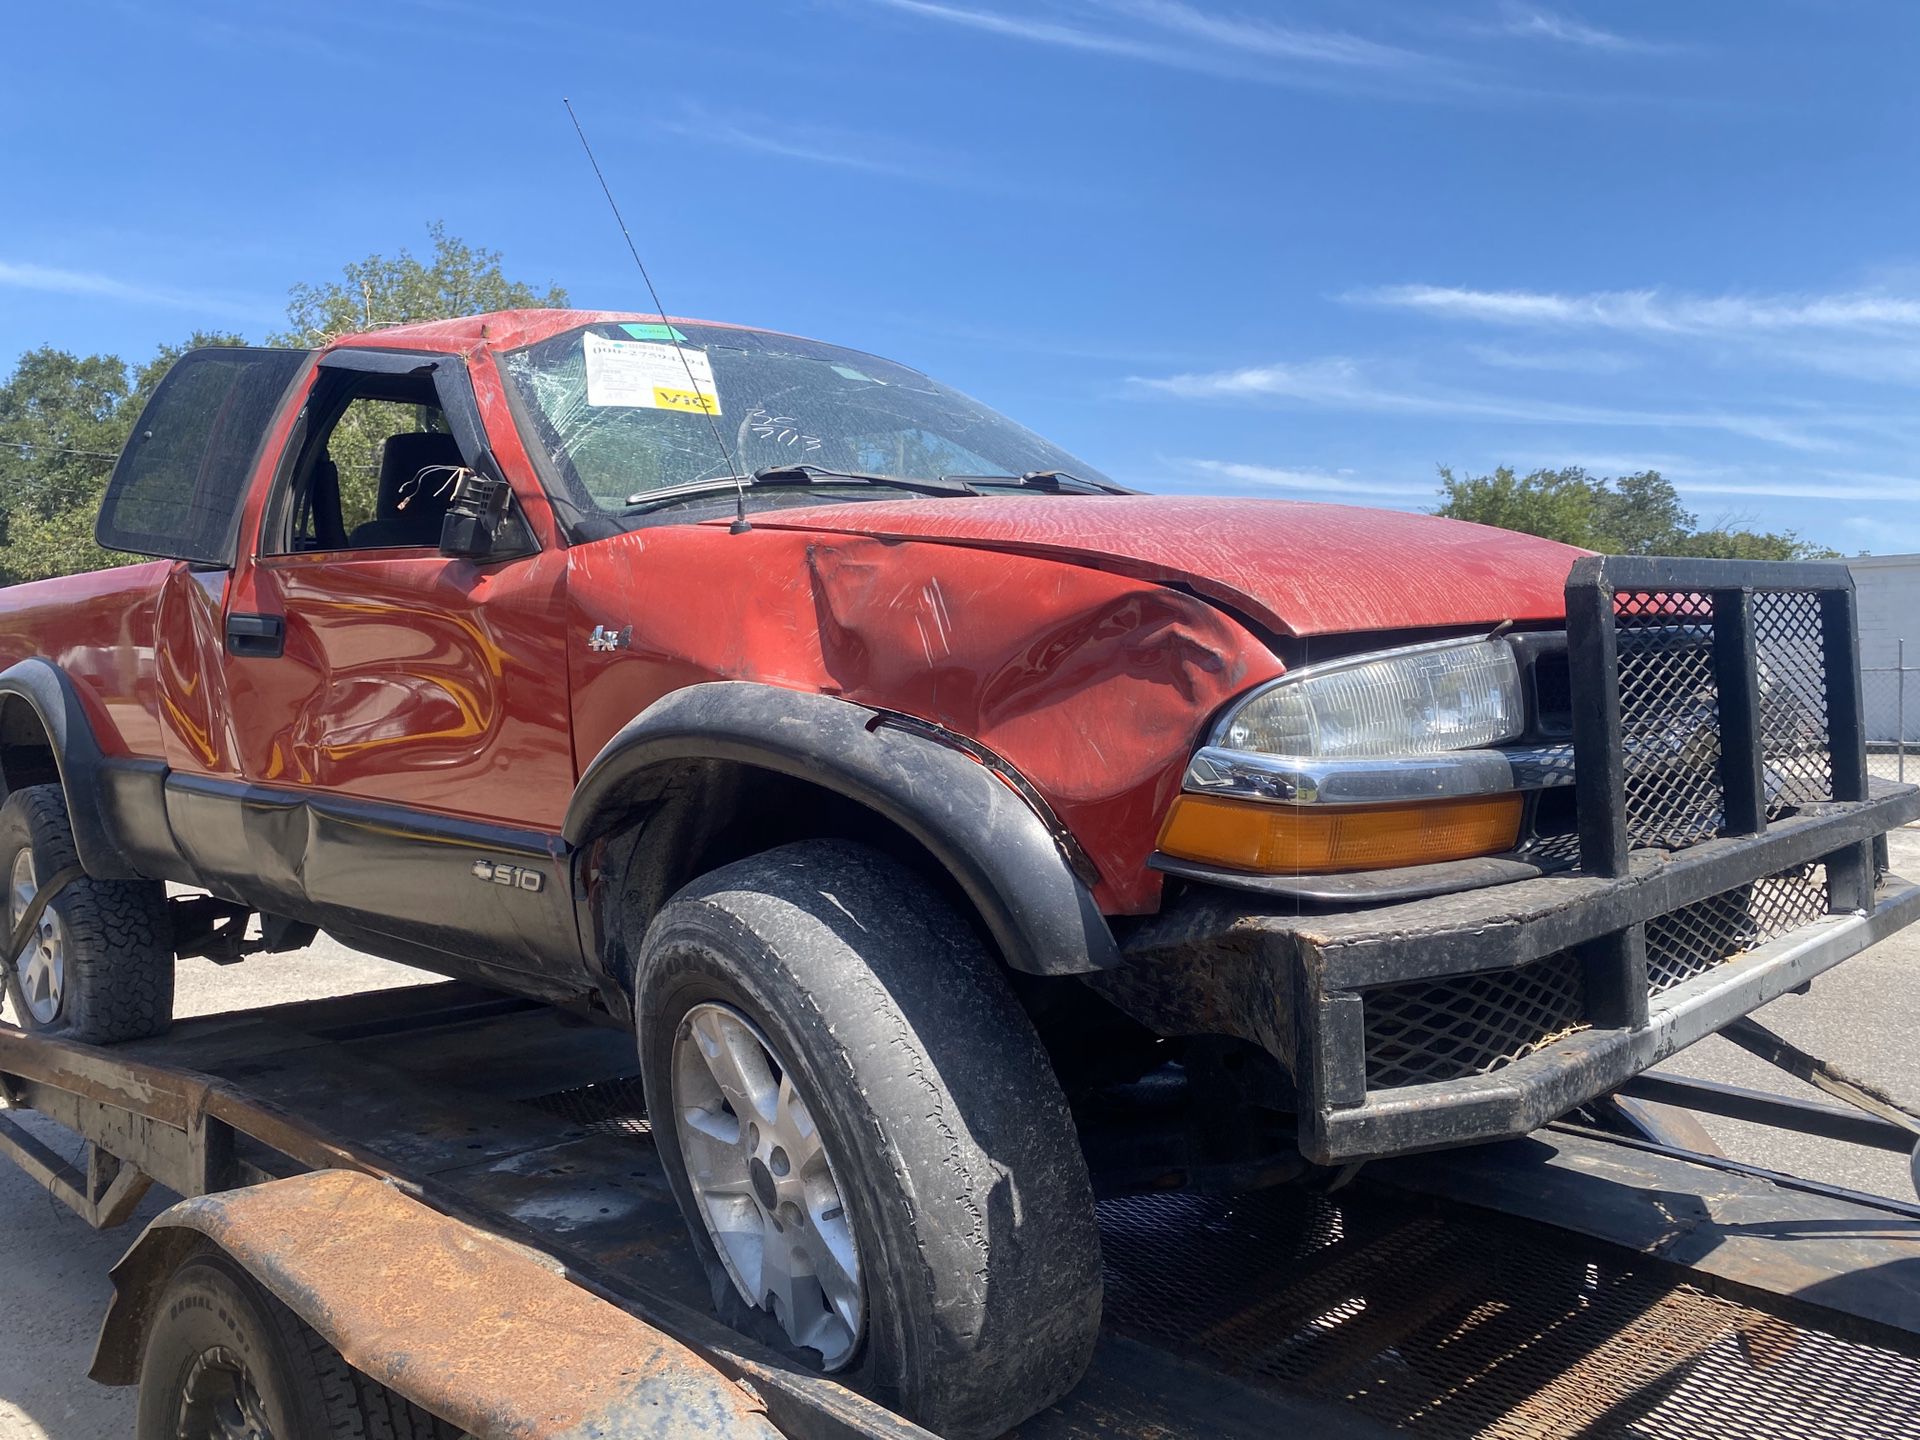 2002 Chevy s10 parts